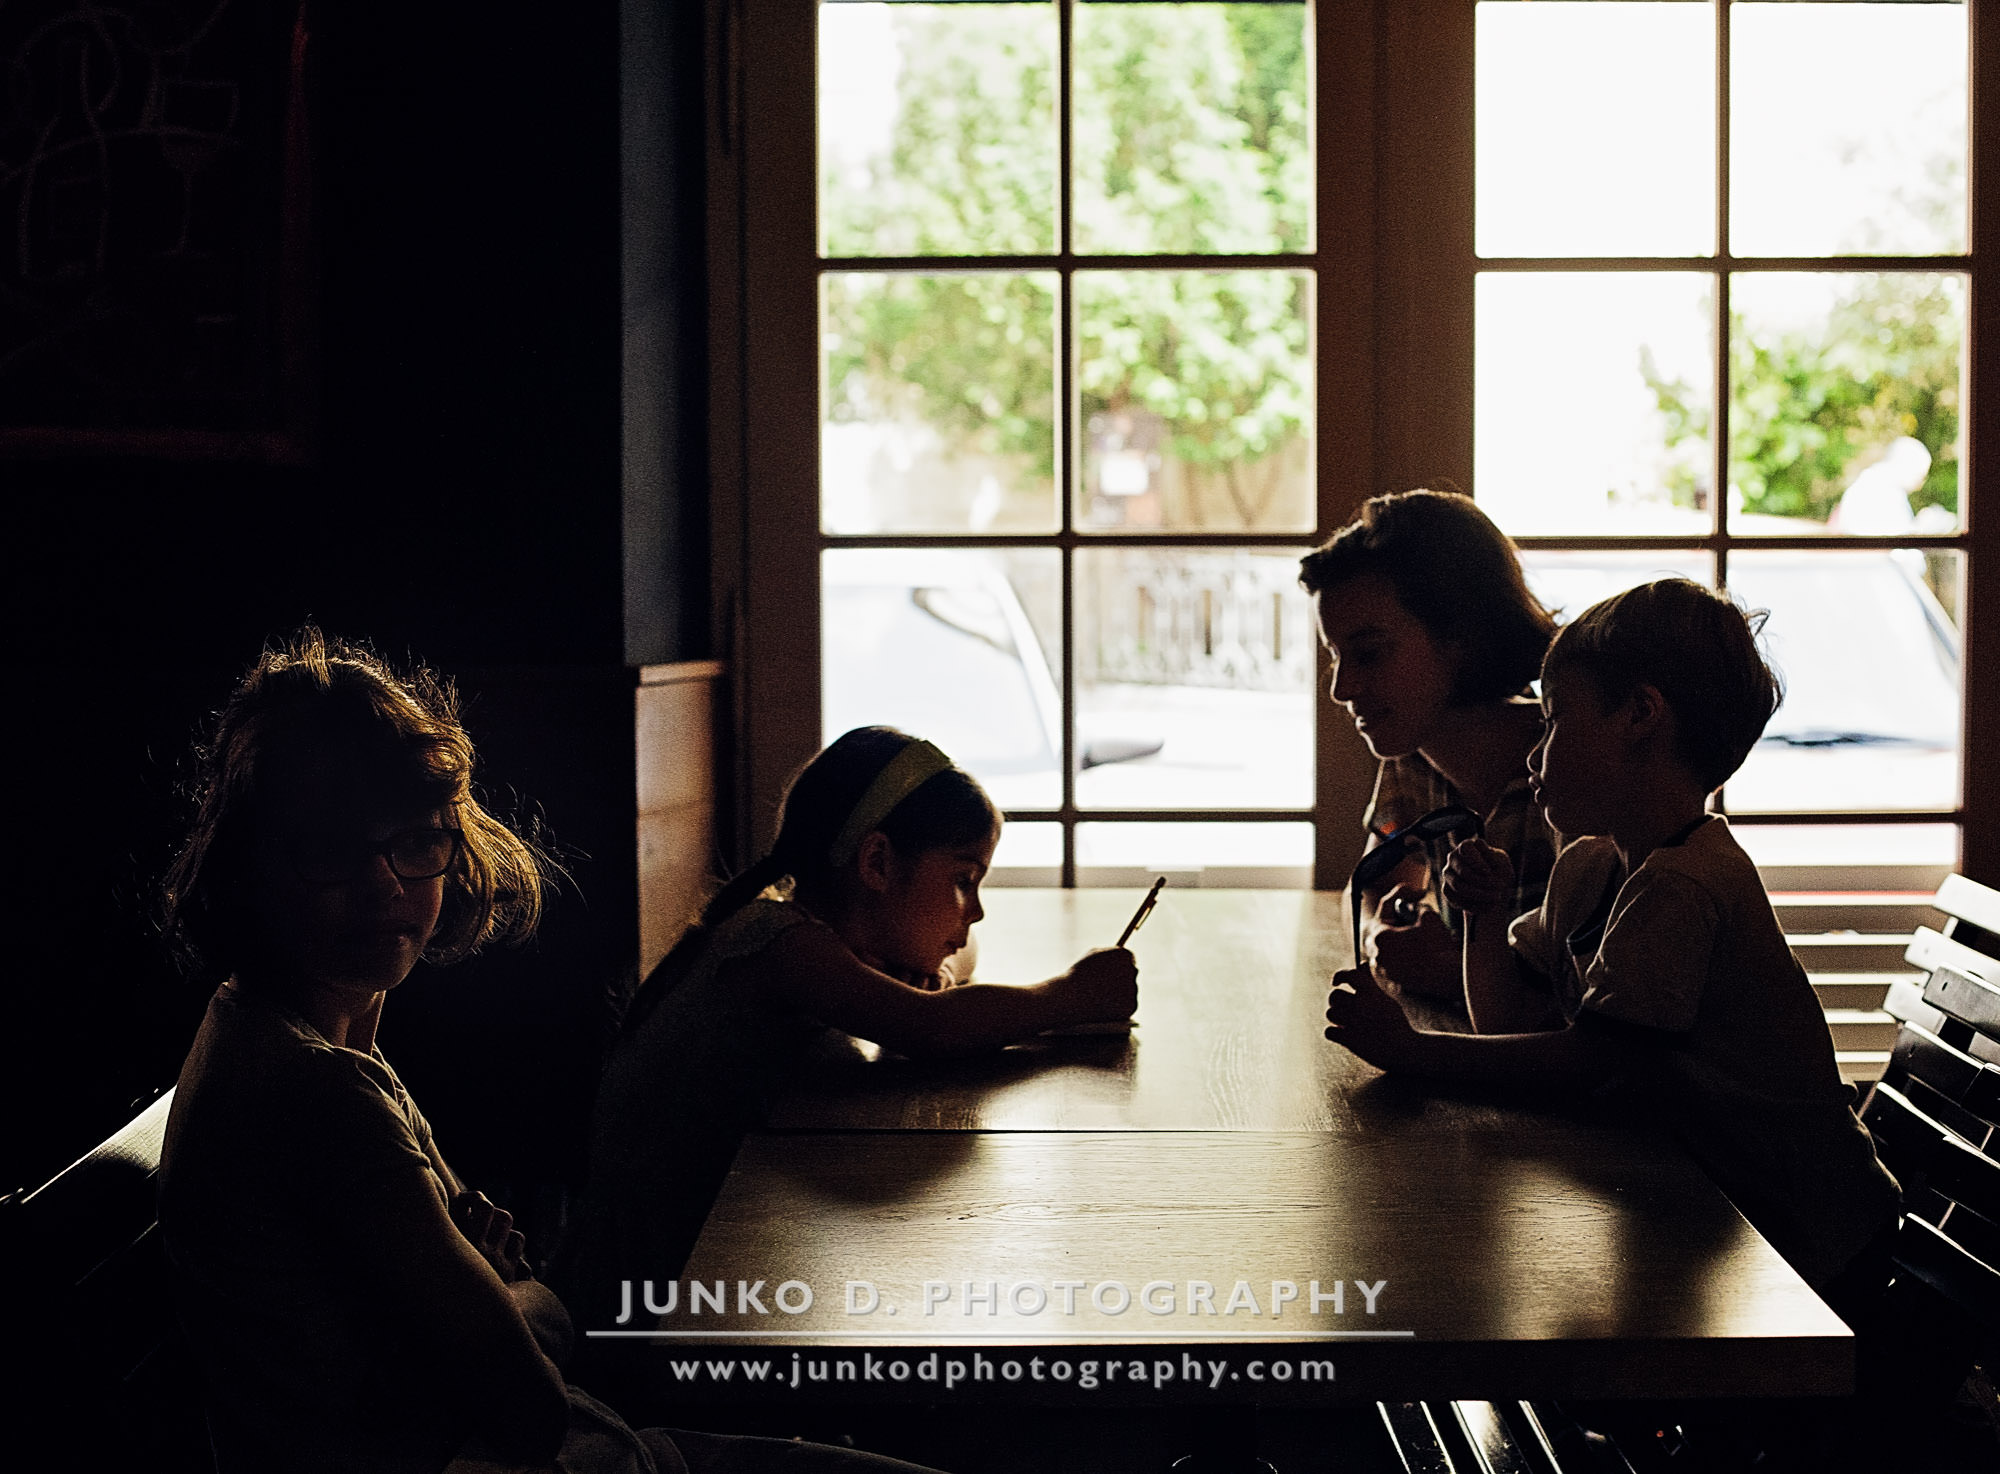 Children Photography by Junko d. Photography